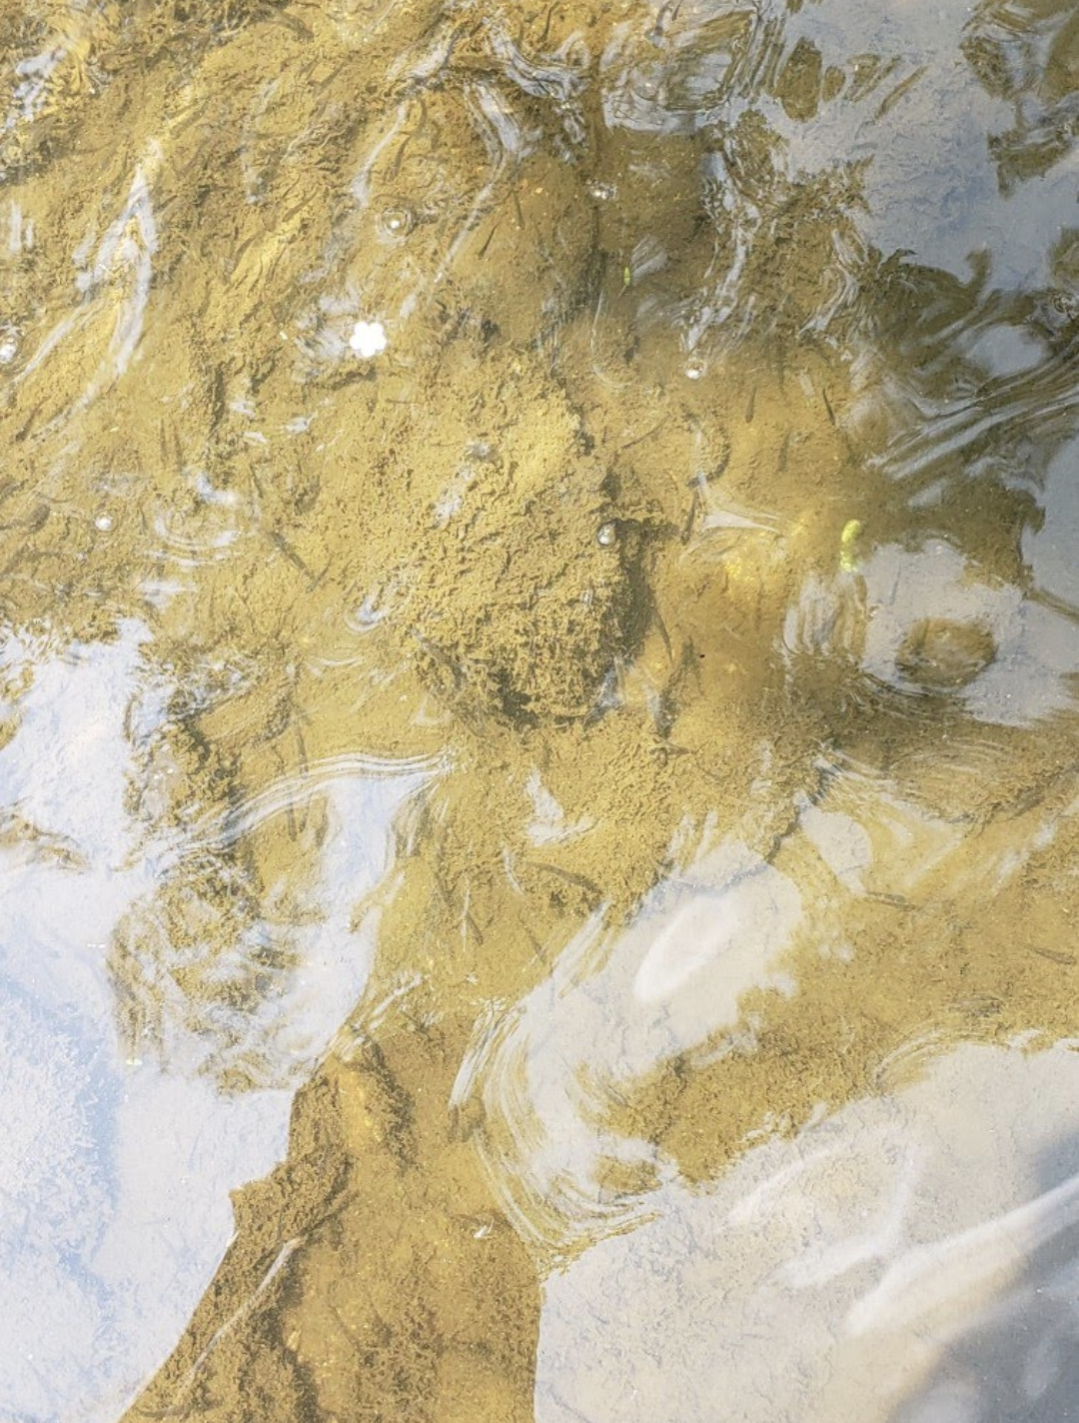 An aerial view of the muddy bottom of a creek beneath clear, calm water.